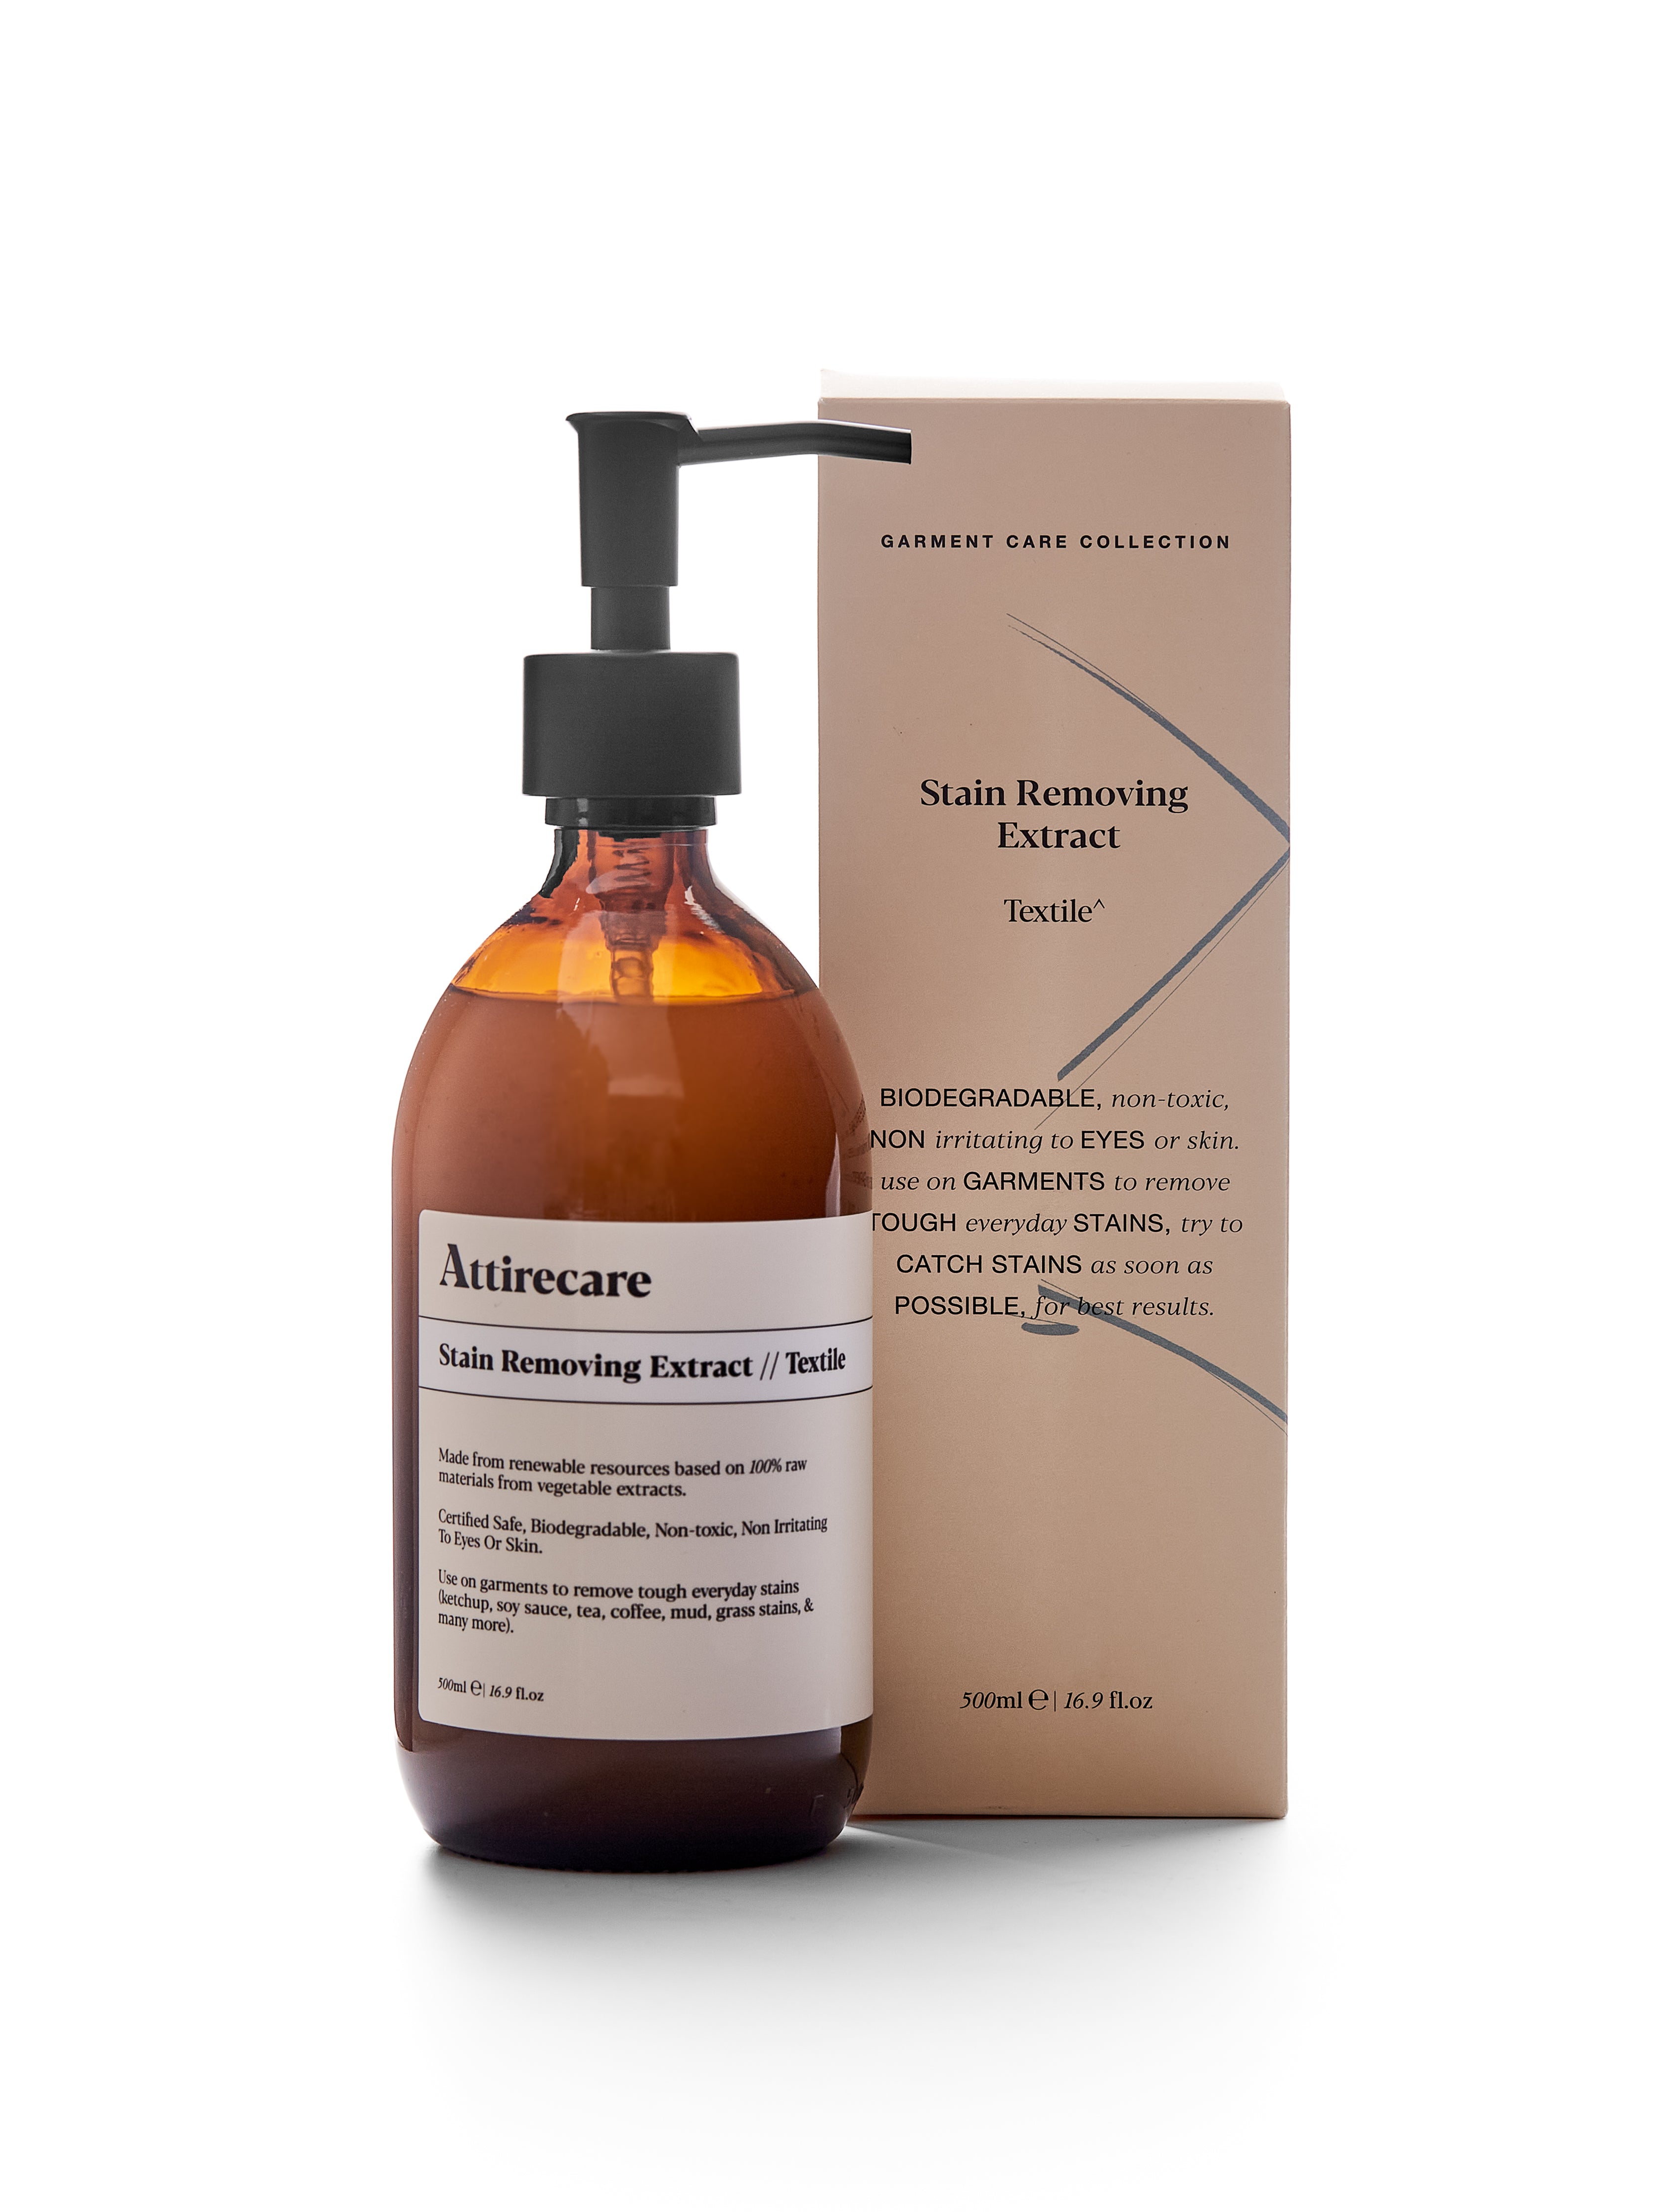 Attirecare Stain Removing Extract 500ml